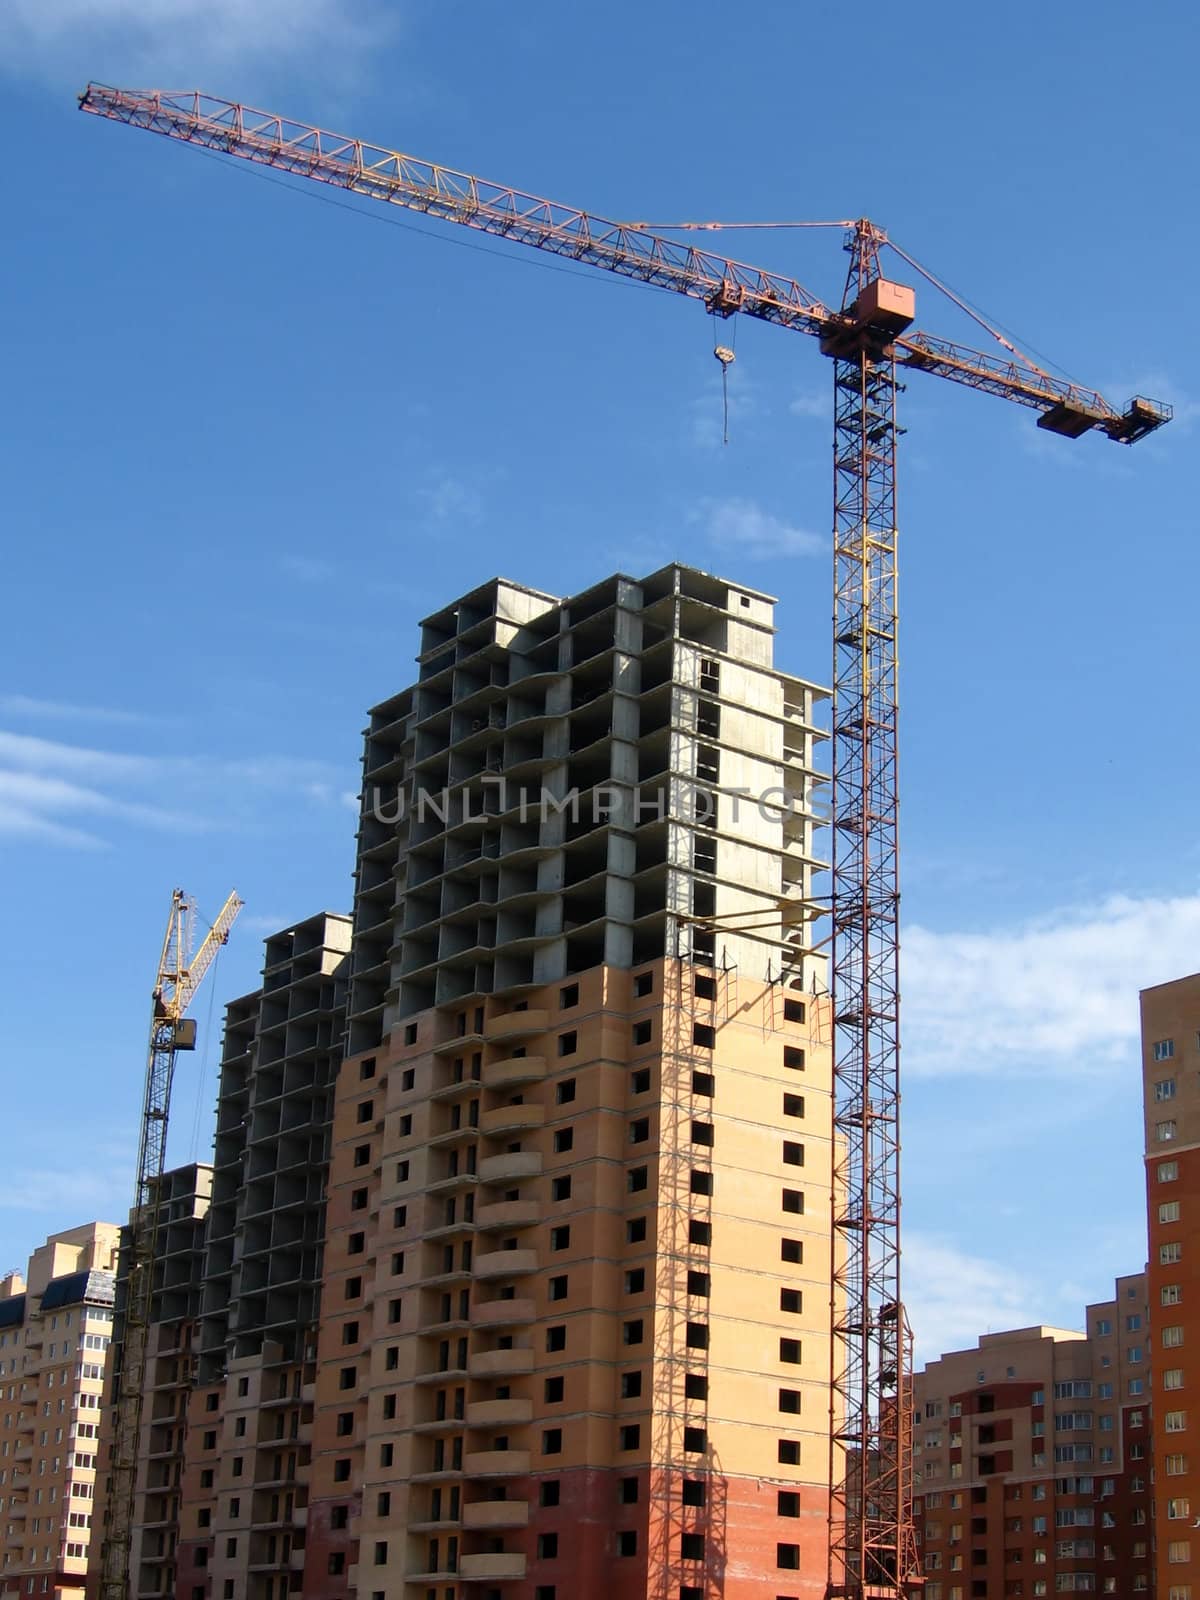 Crane near the new high house by tomatto